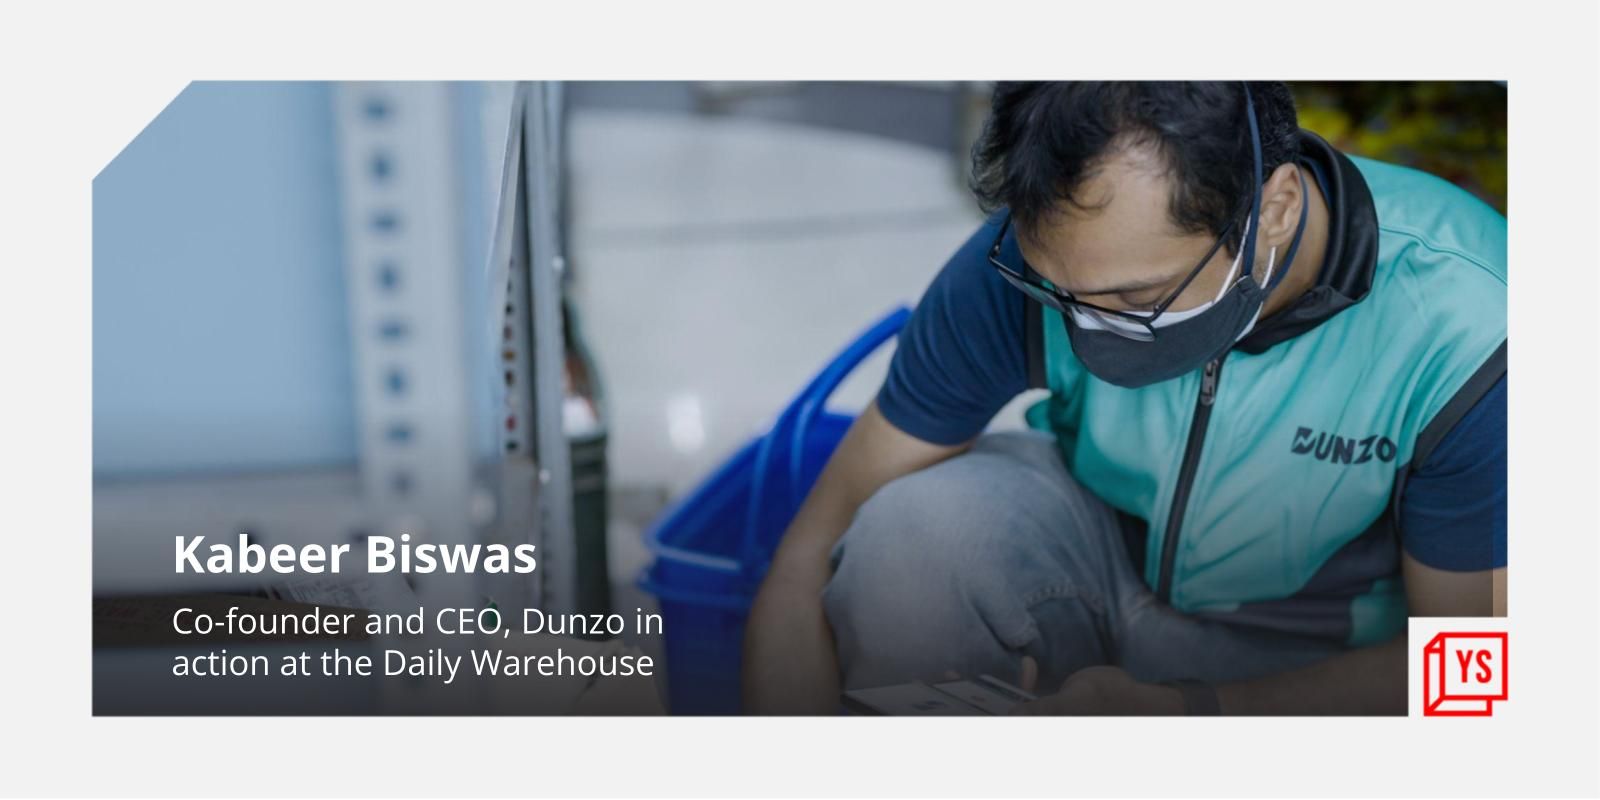 Eyeing an IPO in 2-4 years, here’s how Dunzo aims to grow 3X with Reliance Retail investment 
